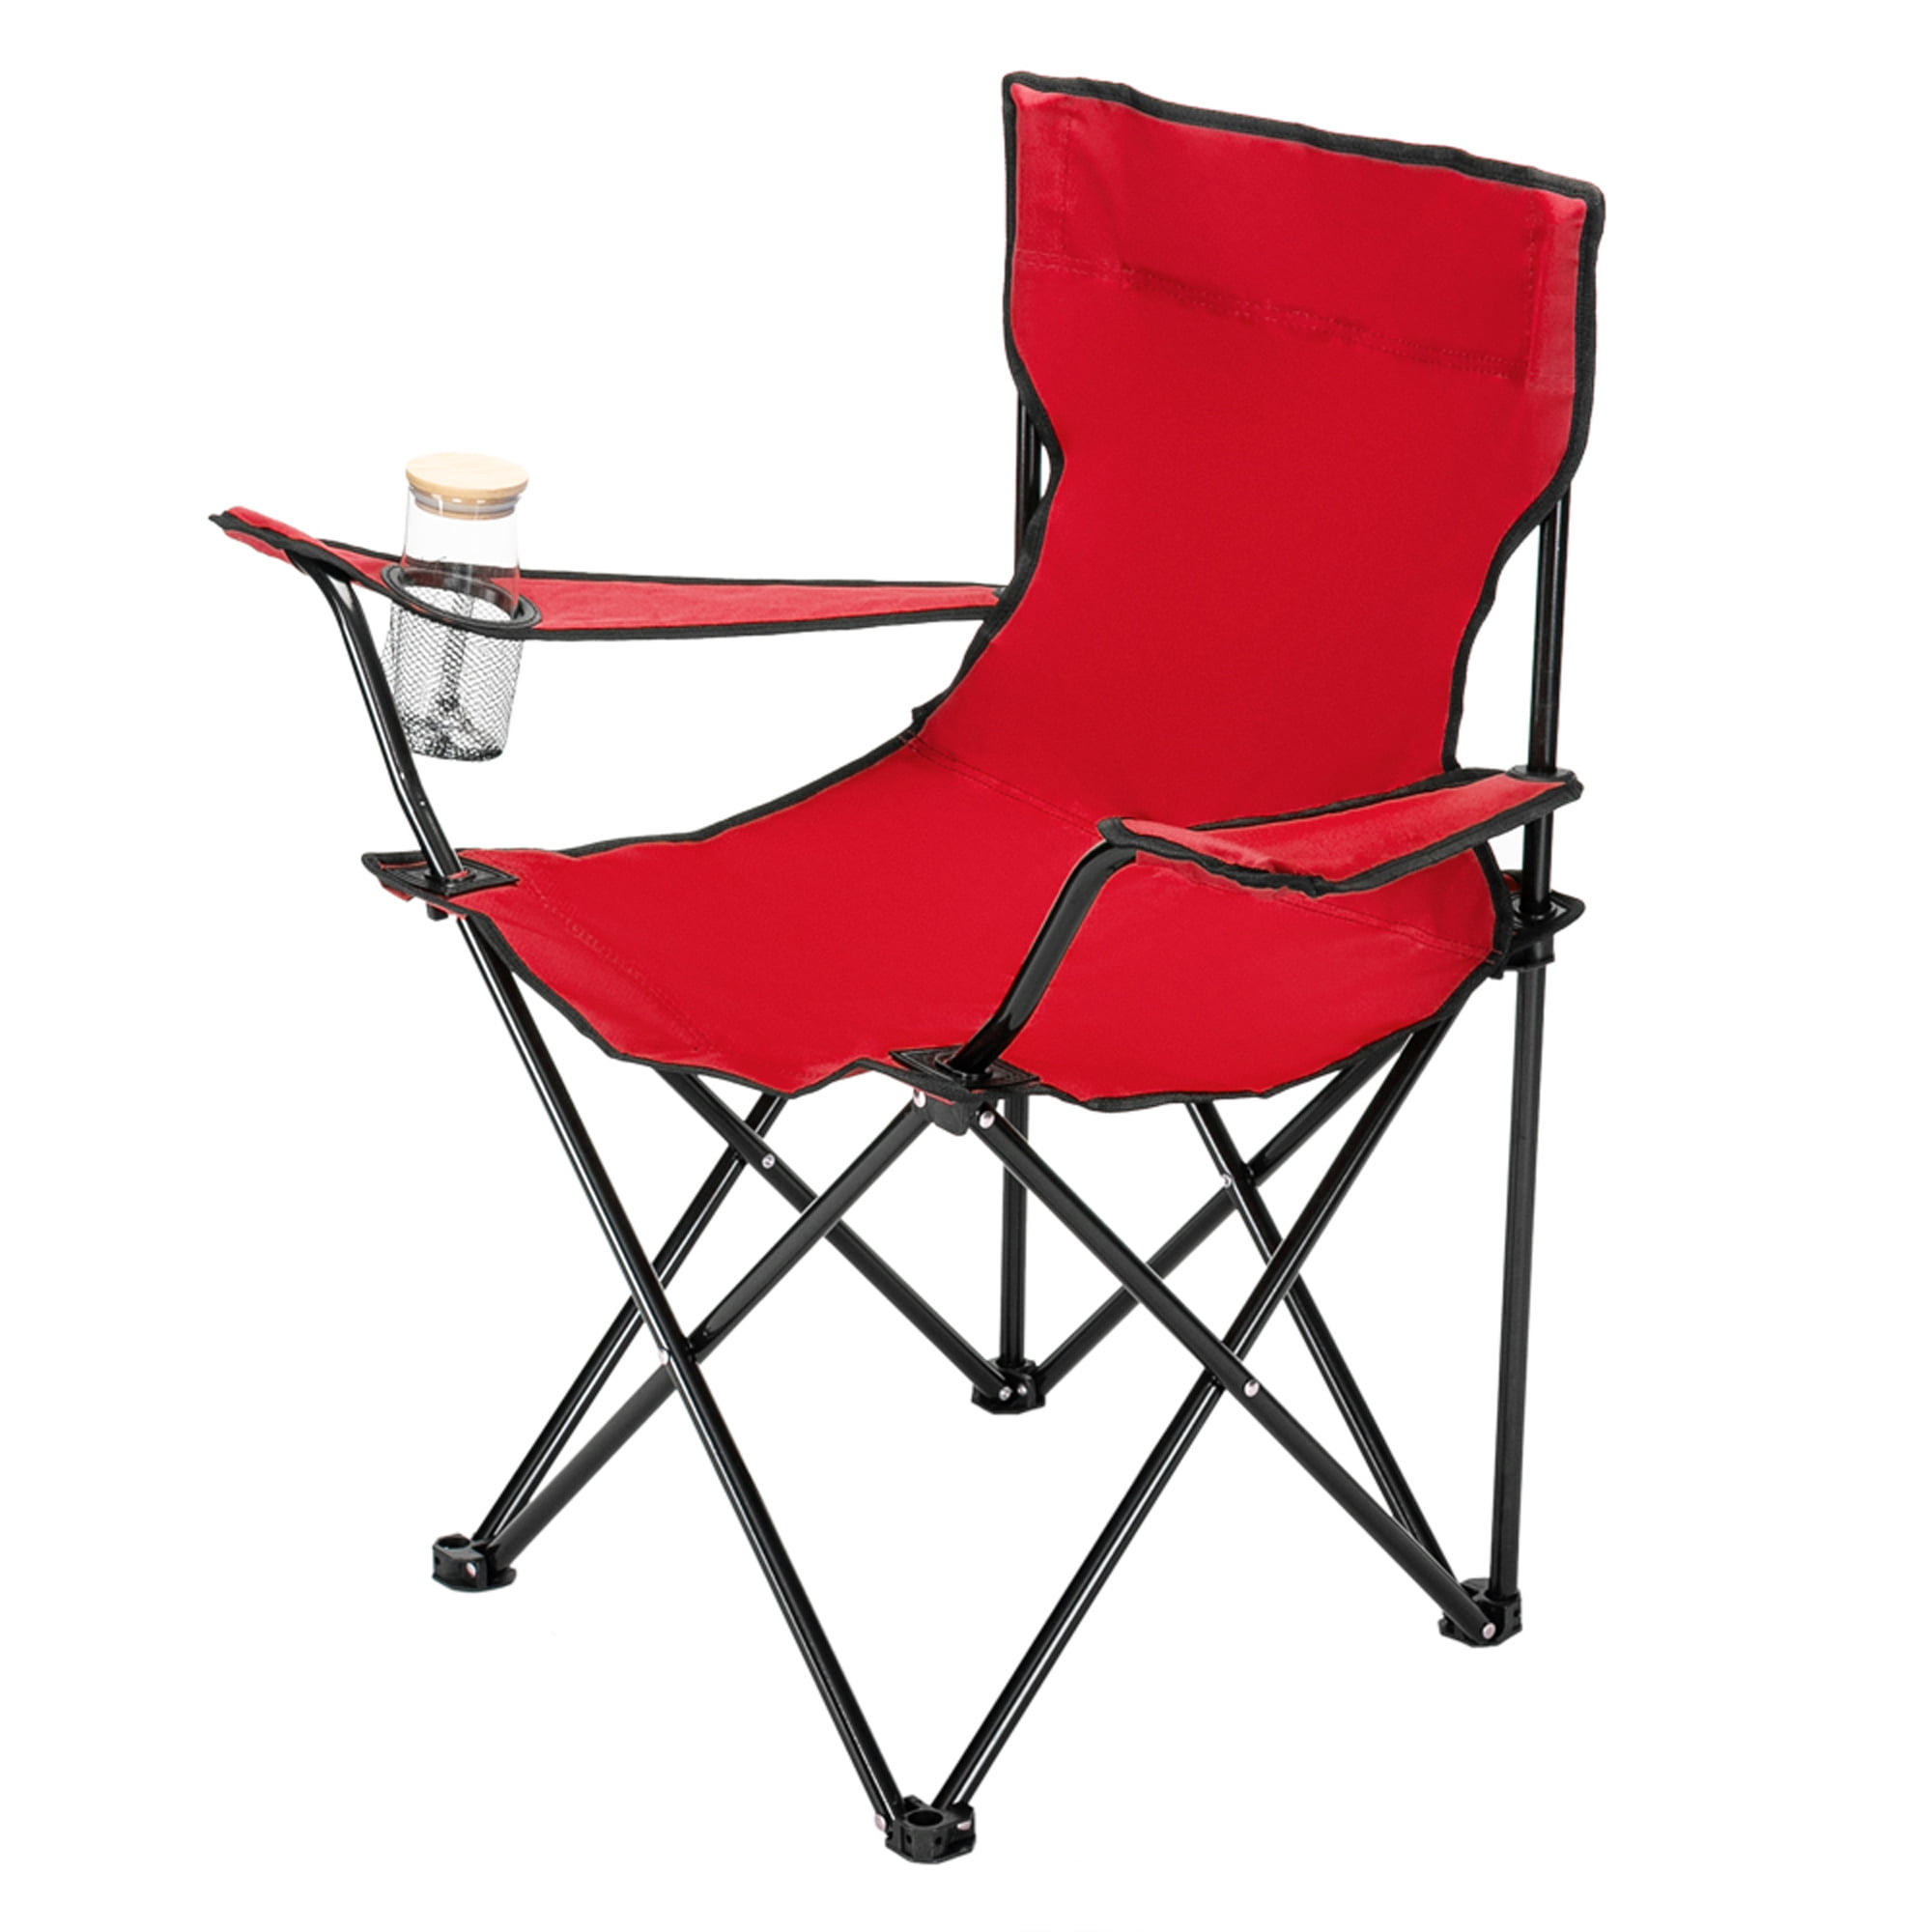 Folding Chair for Outdoors, Heavy-Duty Portable Camp Chair, 600D 